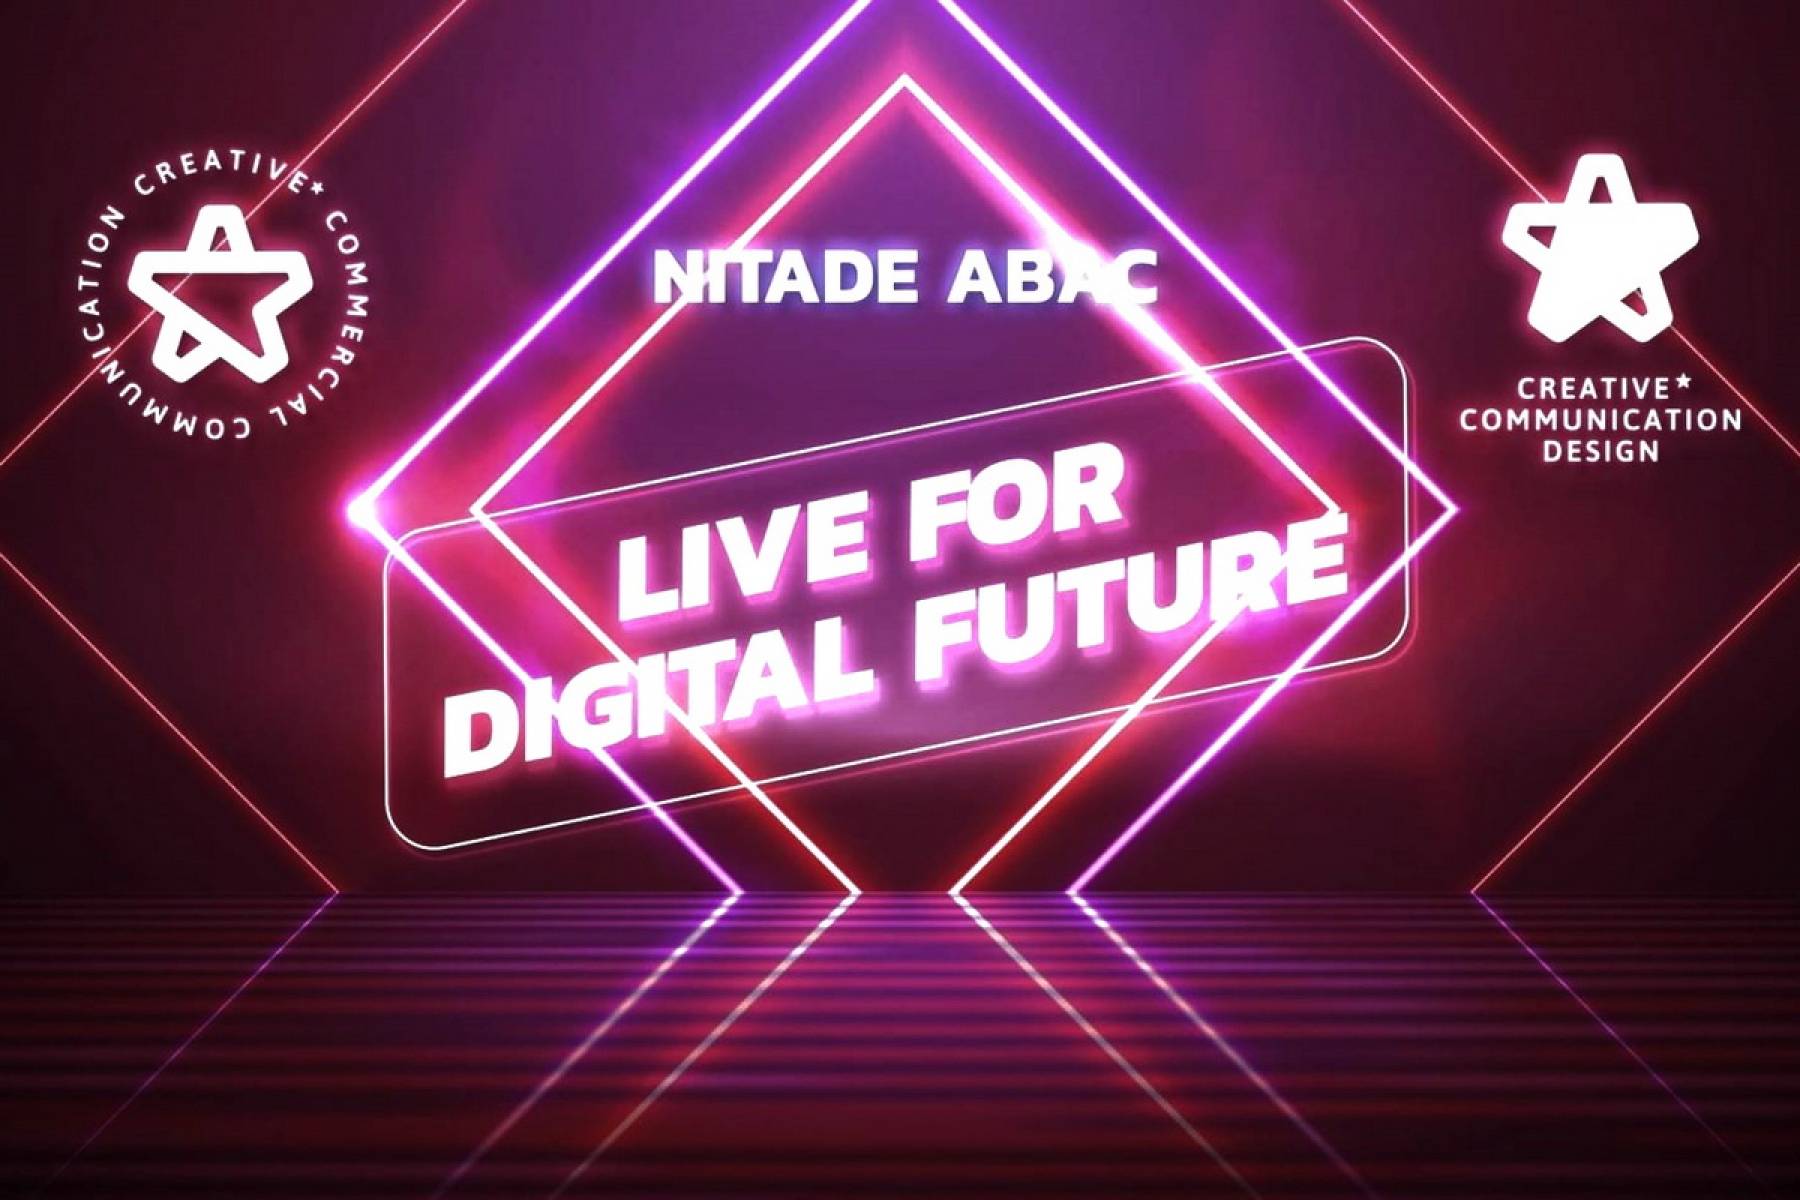 Live for Digital Future: Two New Programs, Creative Commercial Communication (CCC) and Creative Communication Design (CCD)